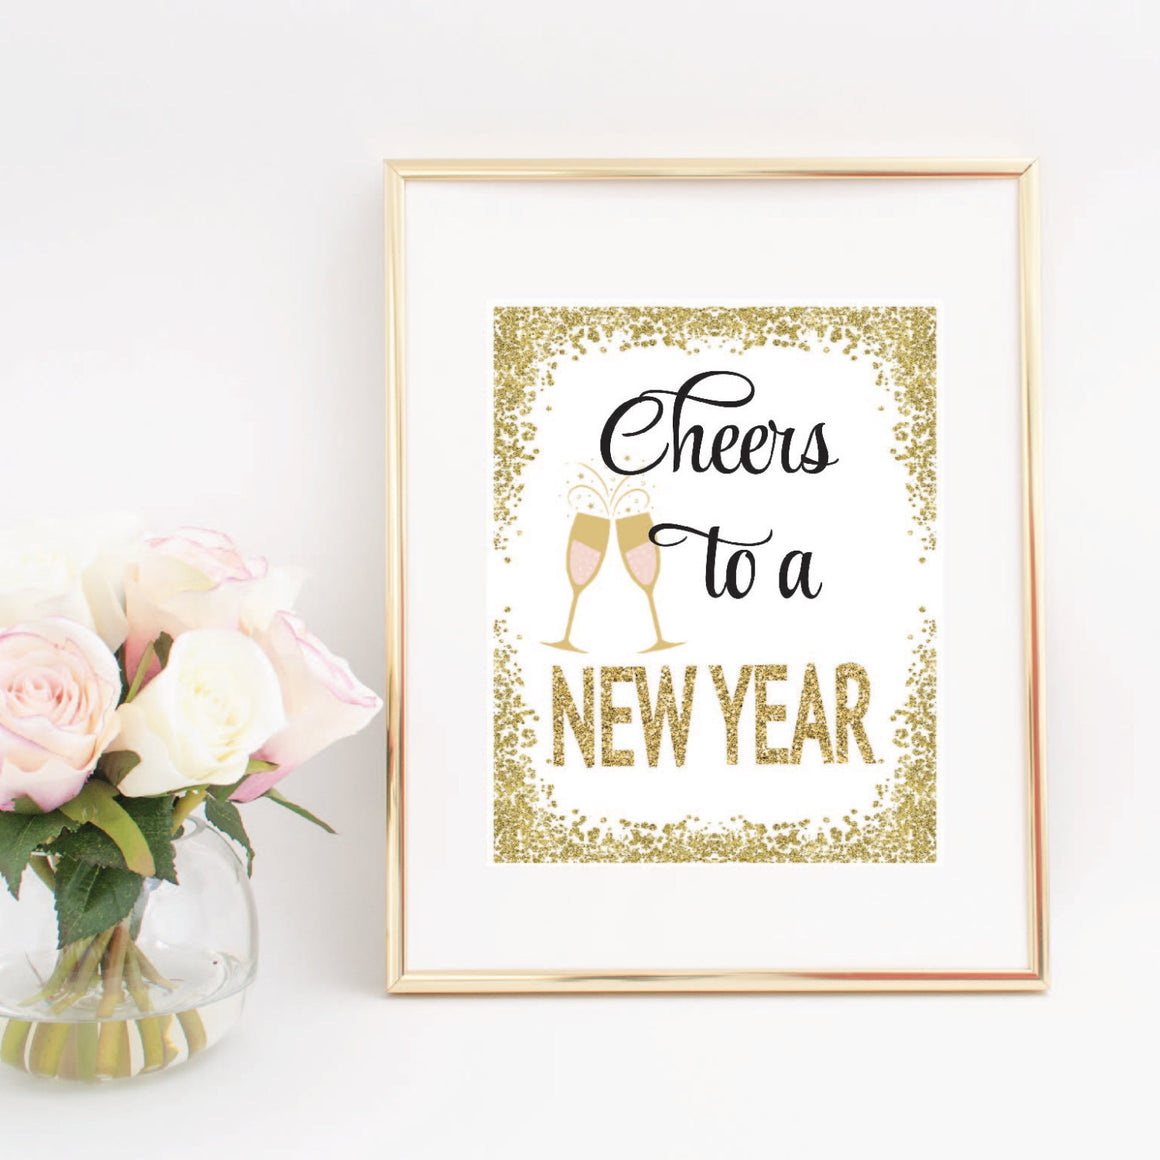 Cheers to a new year gold glitter digital download in a gold frame